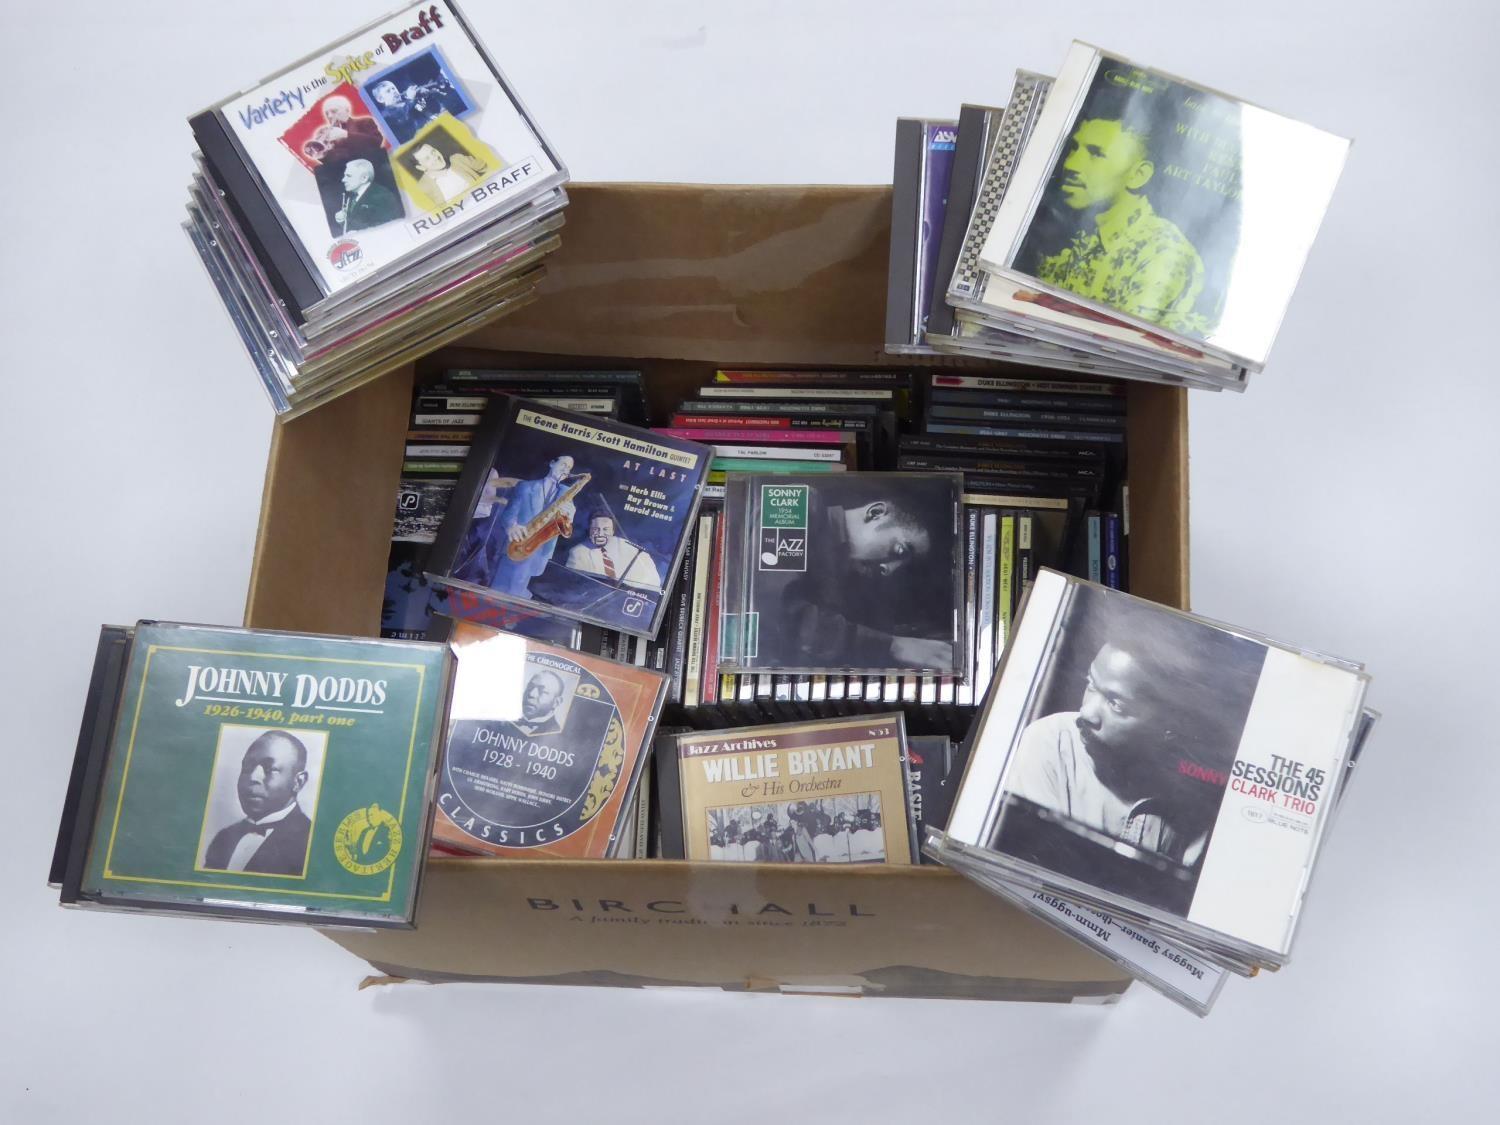 Approximately 120 Jazz cds, a quality selection of recordings covering a mixture of jazz genre,